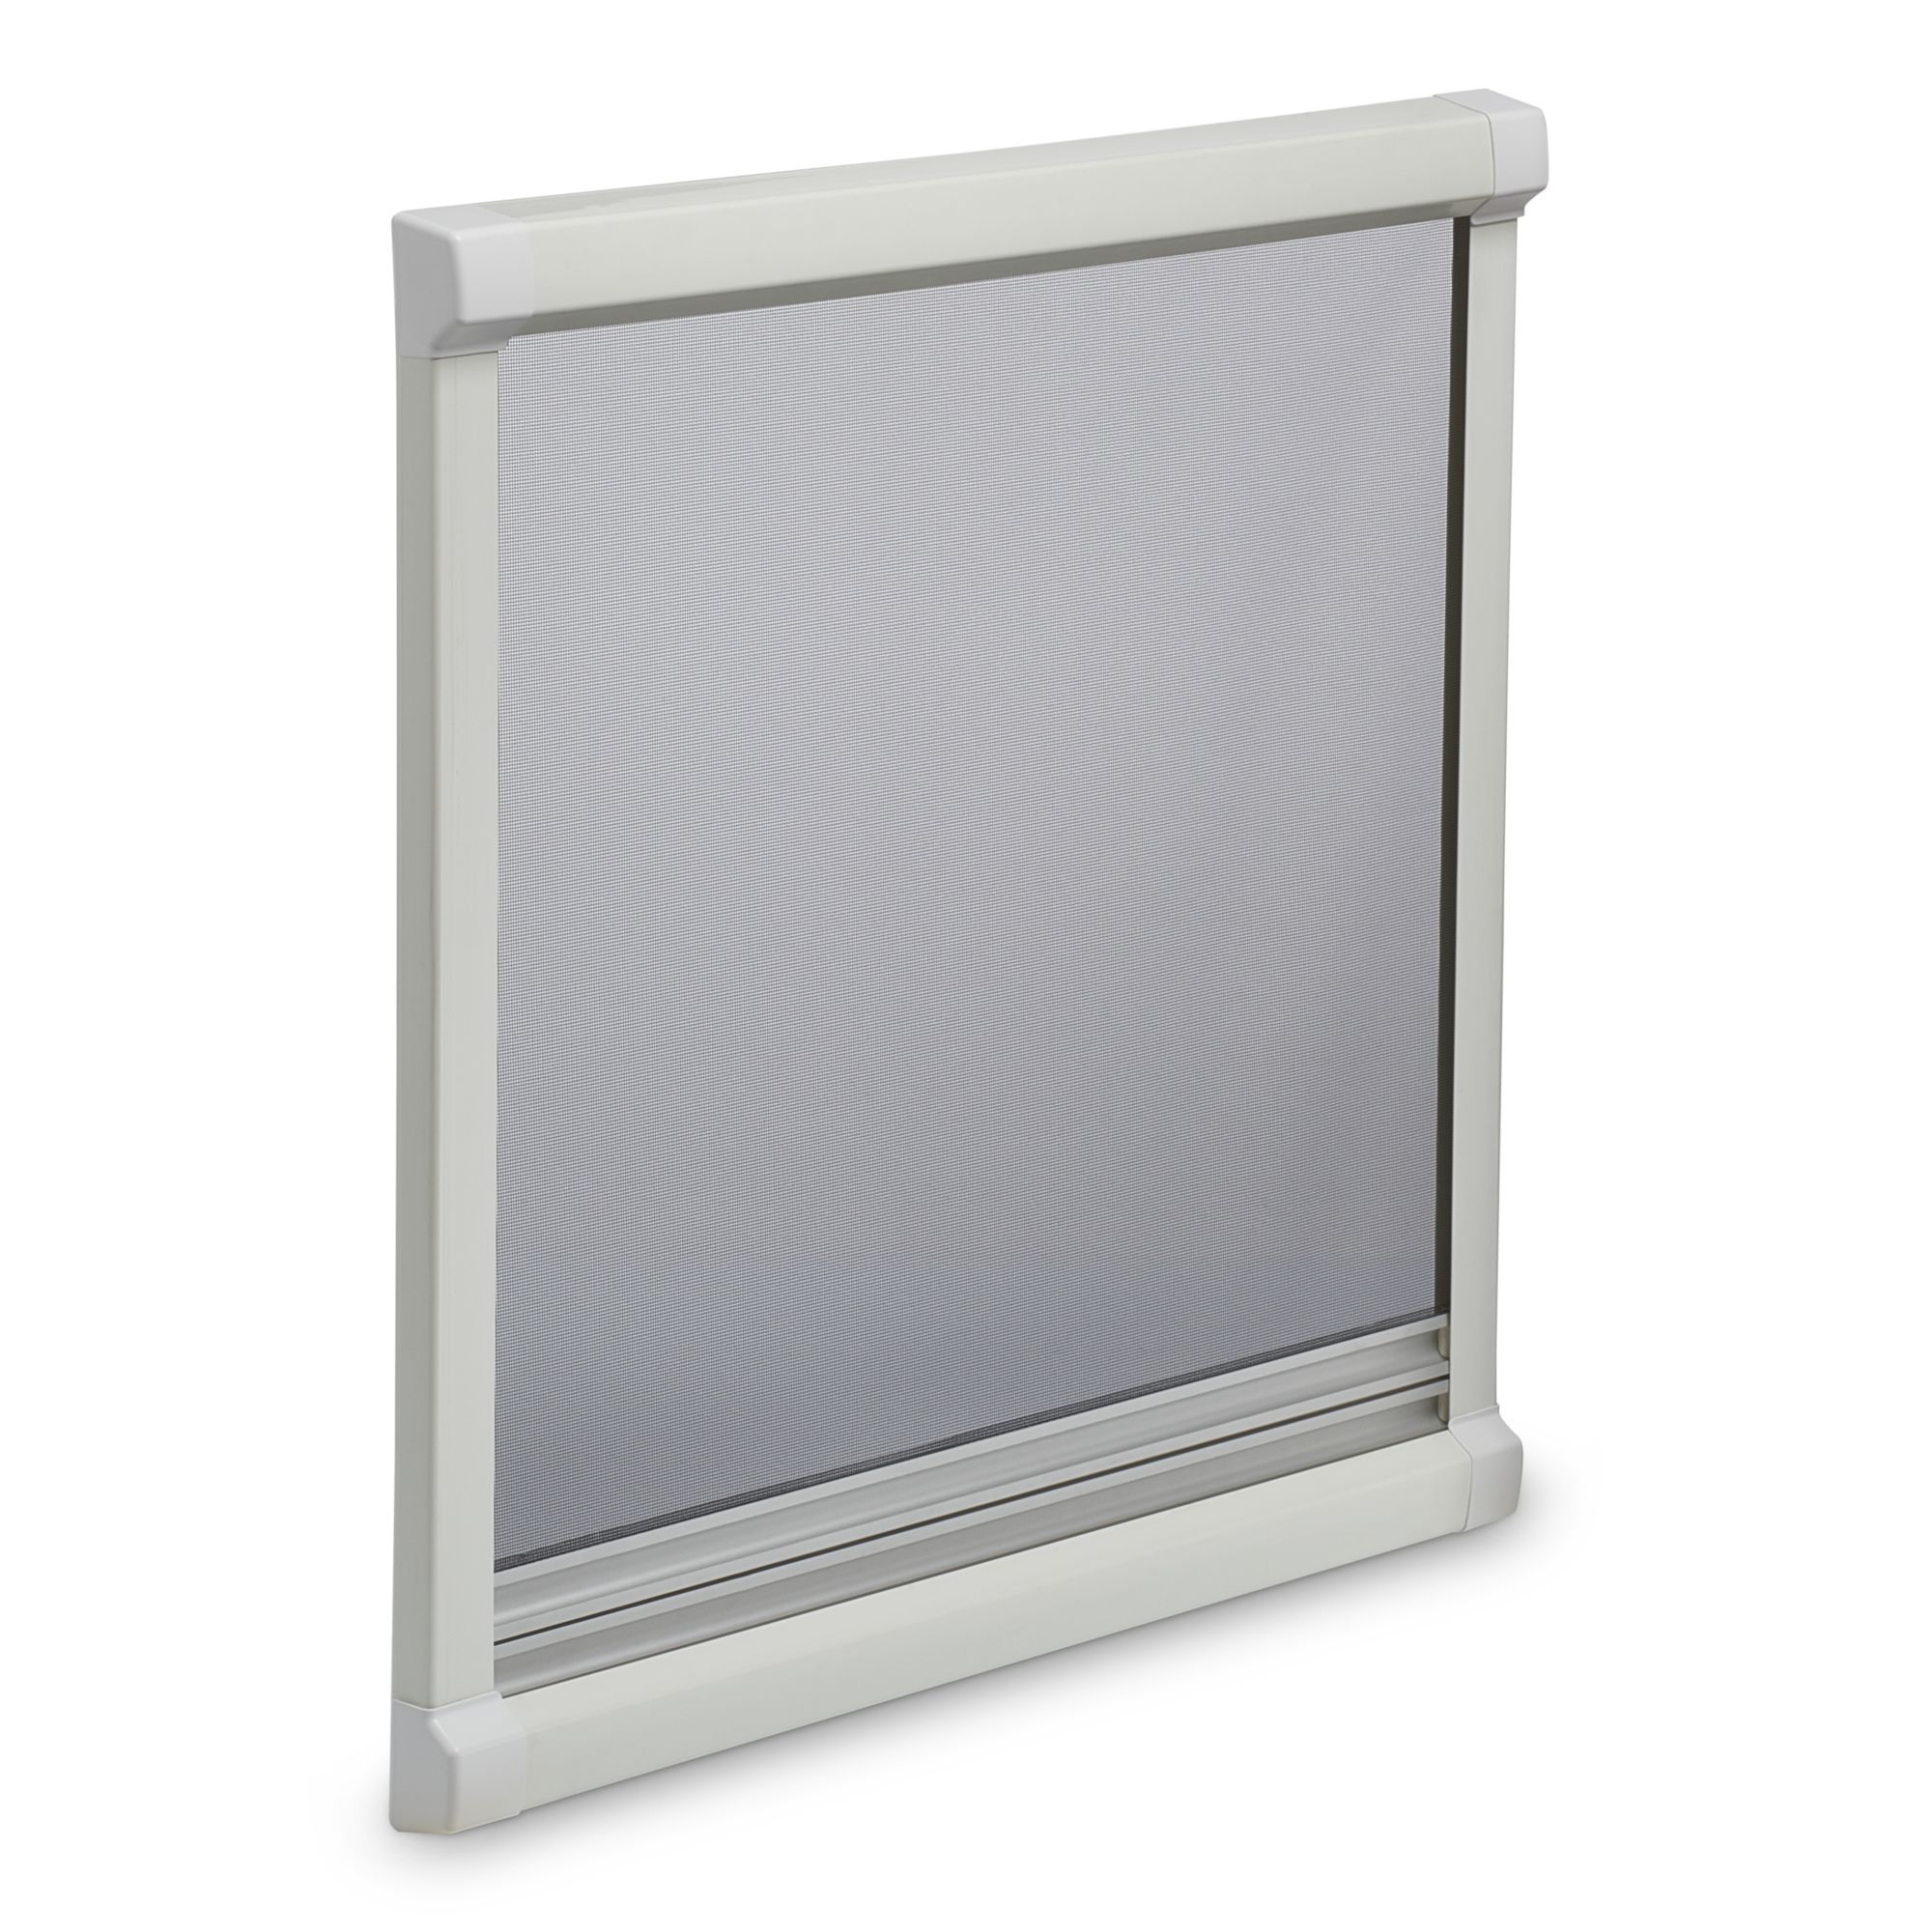 Dometic DB1R Rooflight Roller Blind, 510 x 580 mm, cream-white